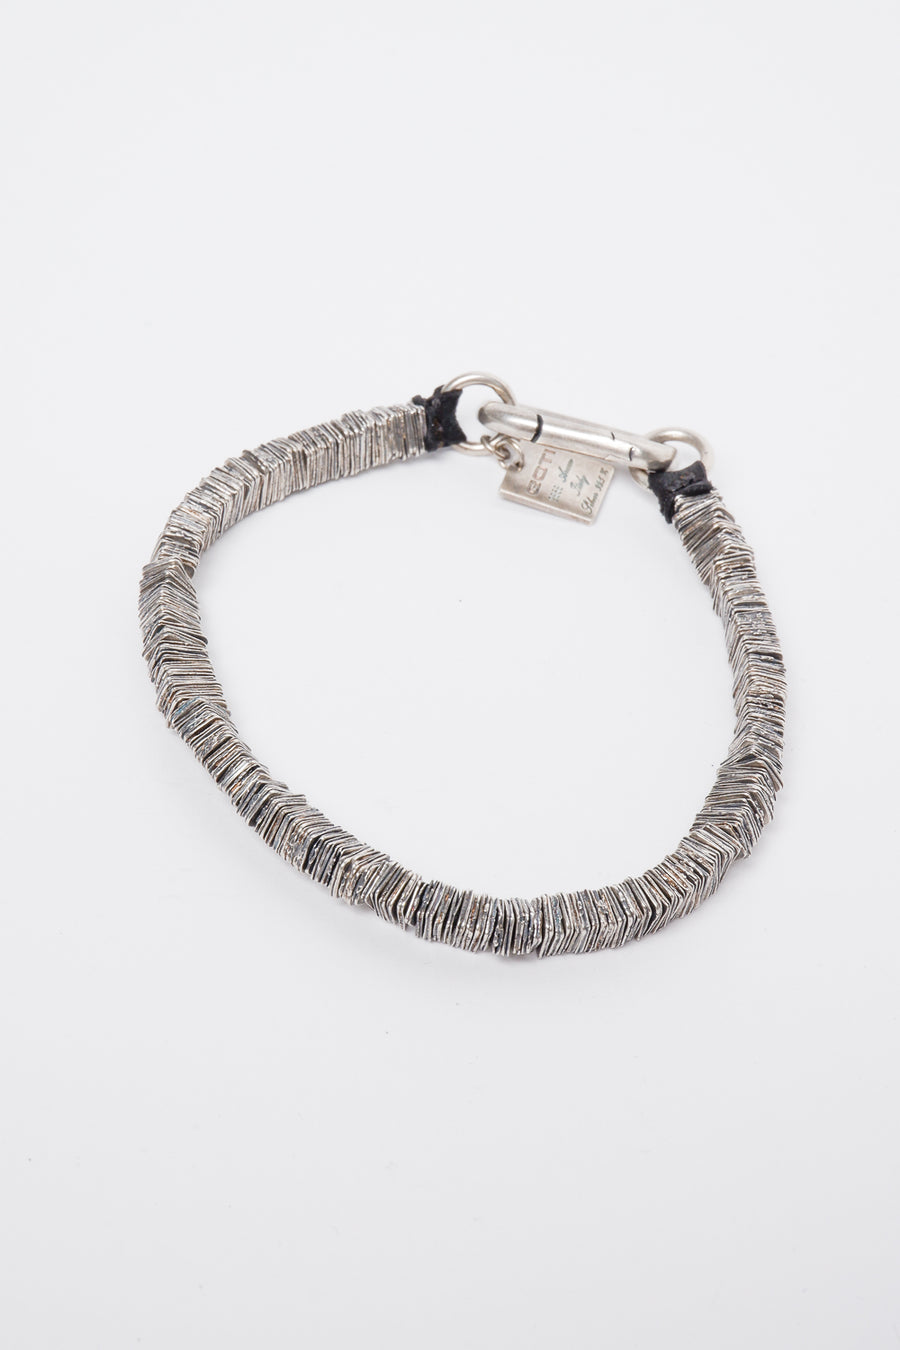 Buy the GOTI BR1114 Bracelet at Intro. Spend £50 for free UK delivery. Official stockists. We ship worldwide.